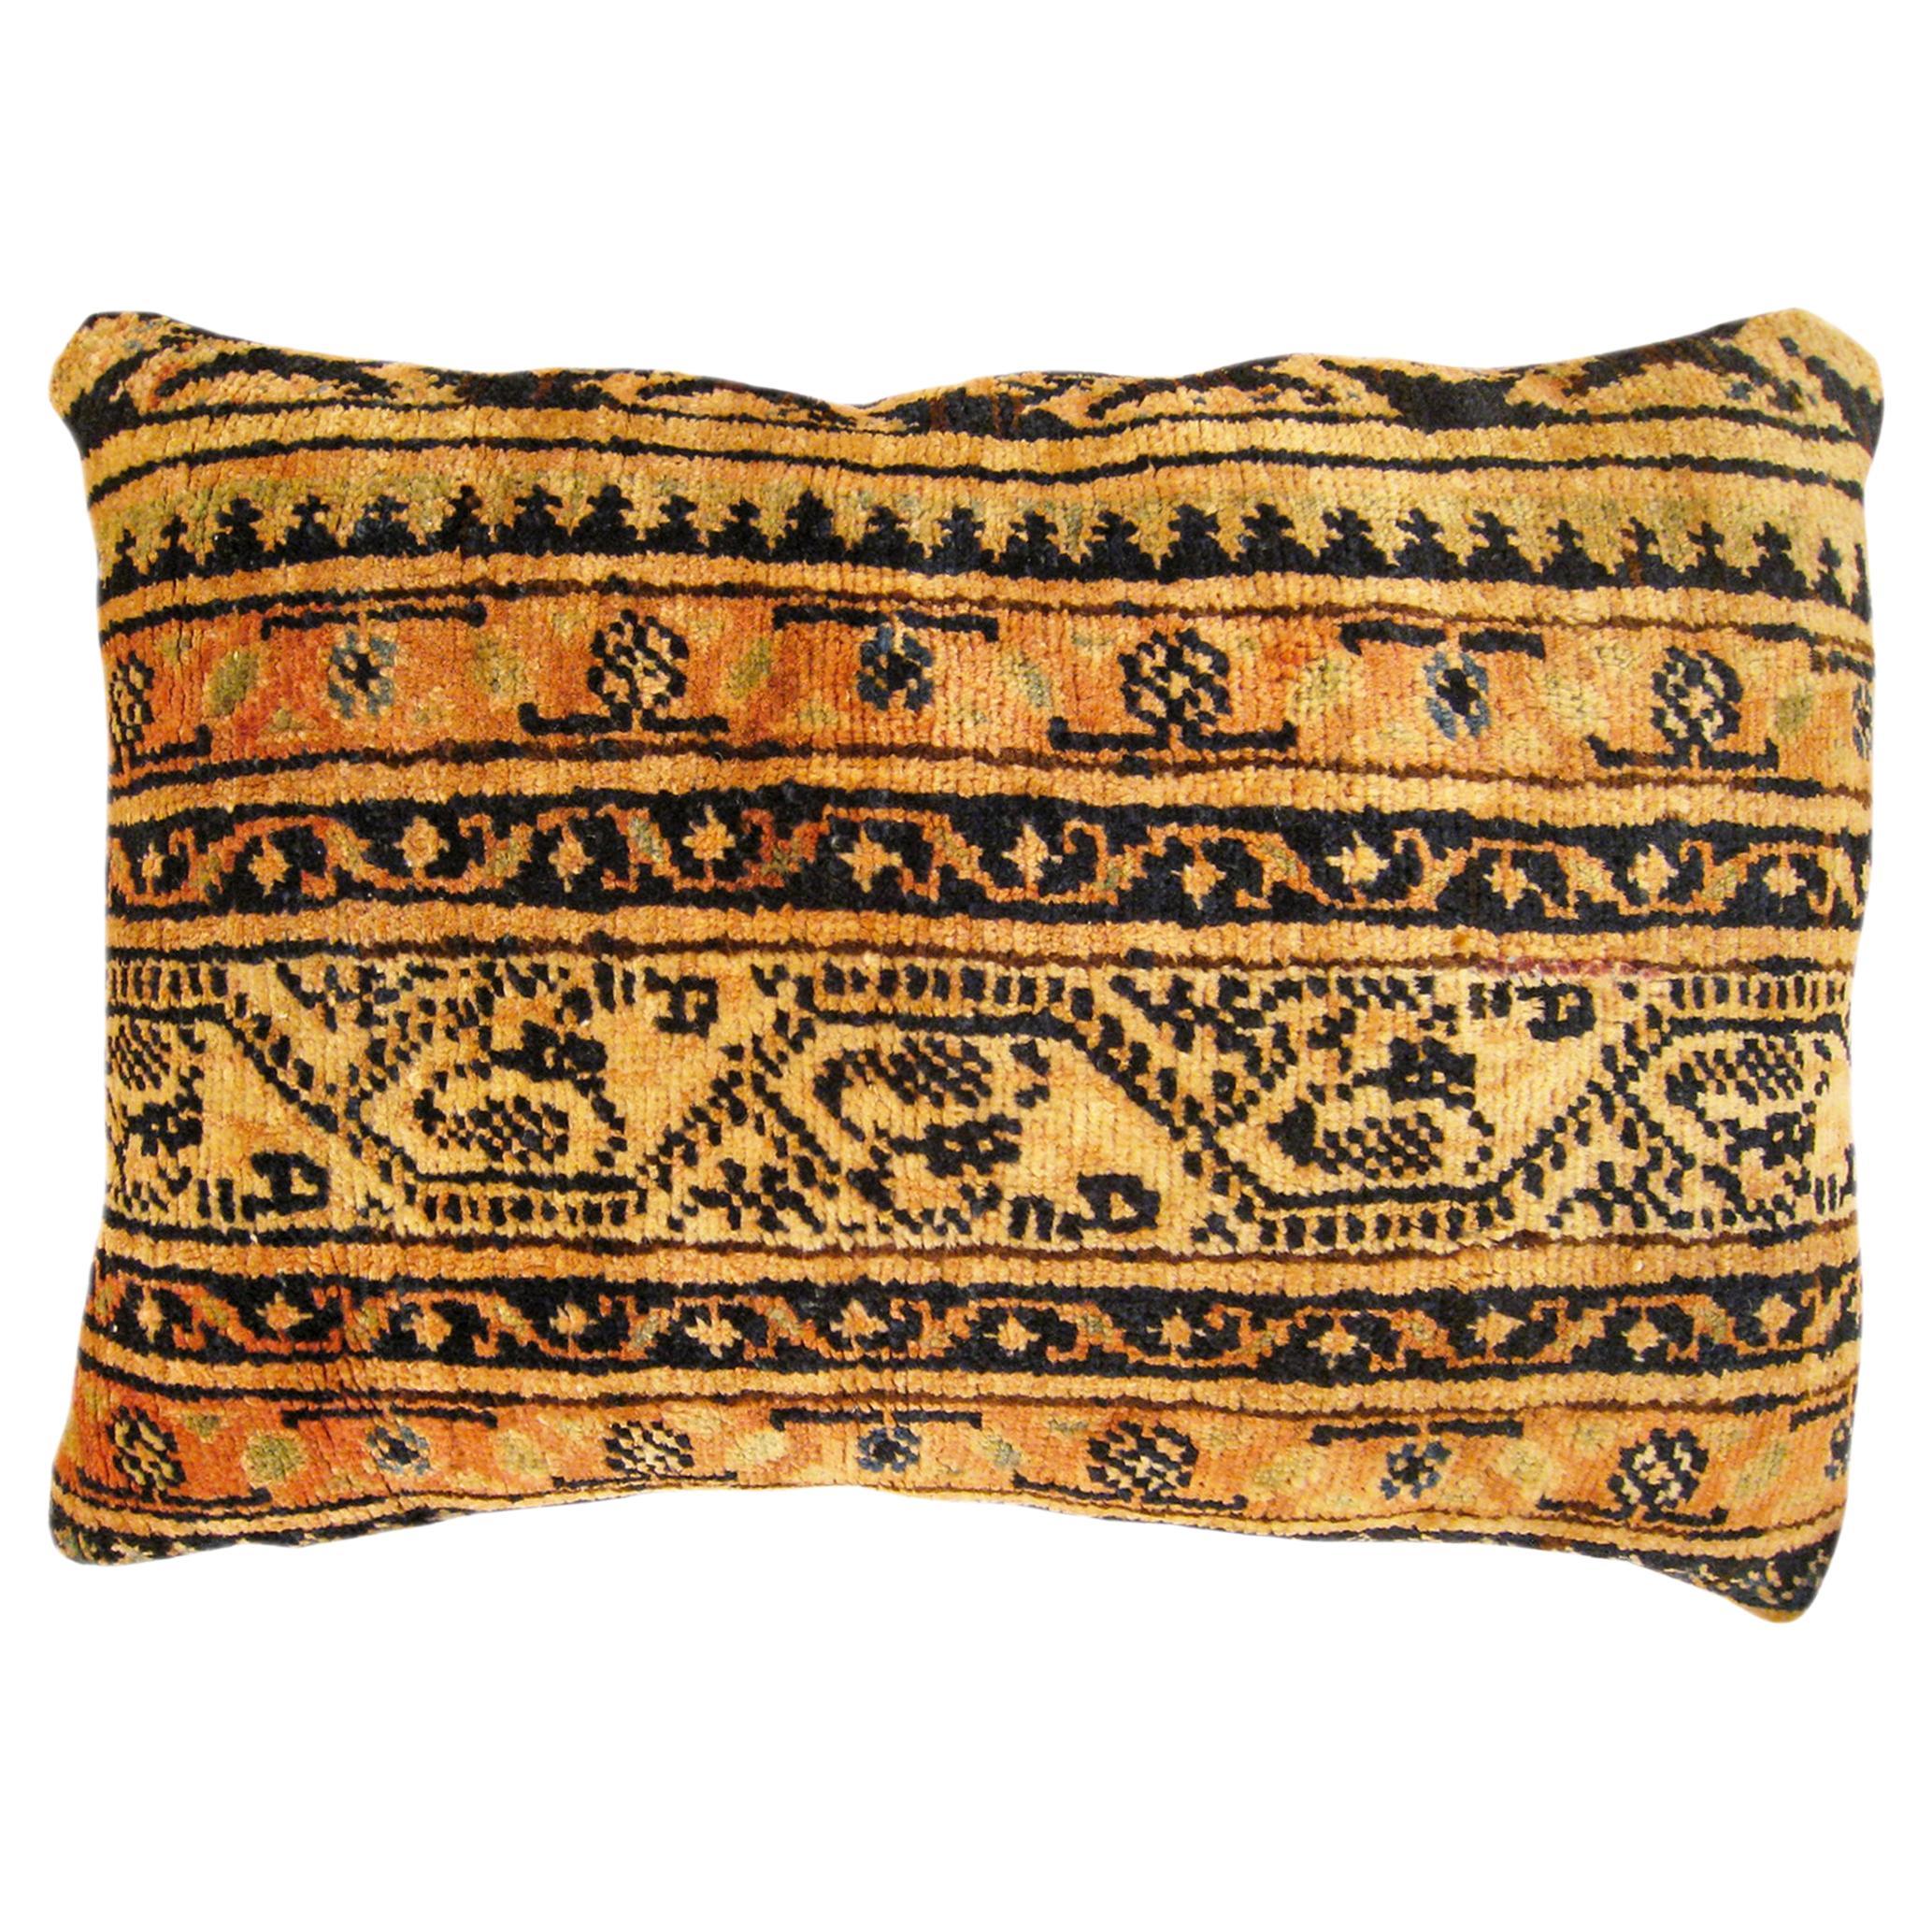 Decorative Antique Persian Saraband Carpet Pillow with a Paisley Design Allover For Sale